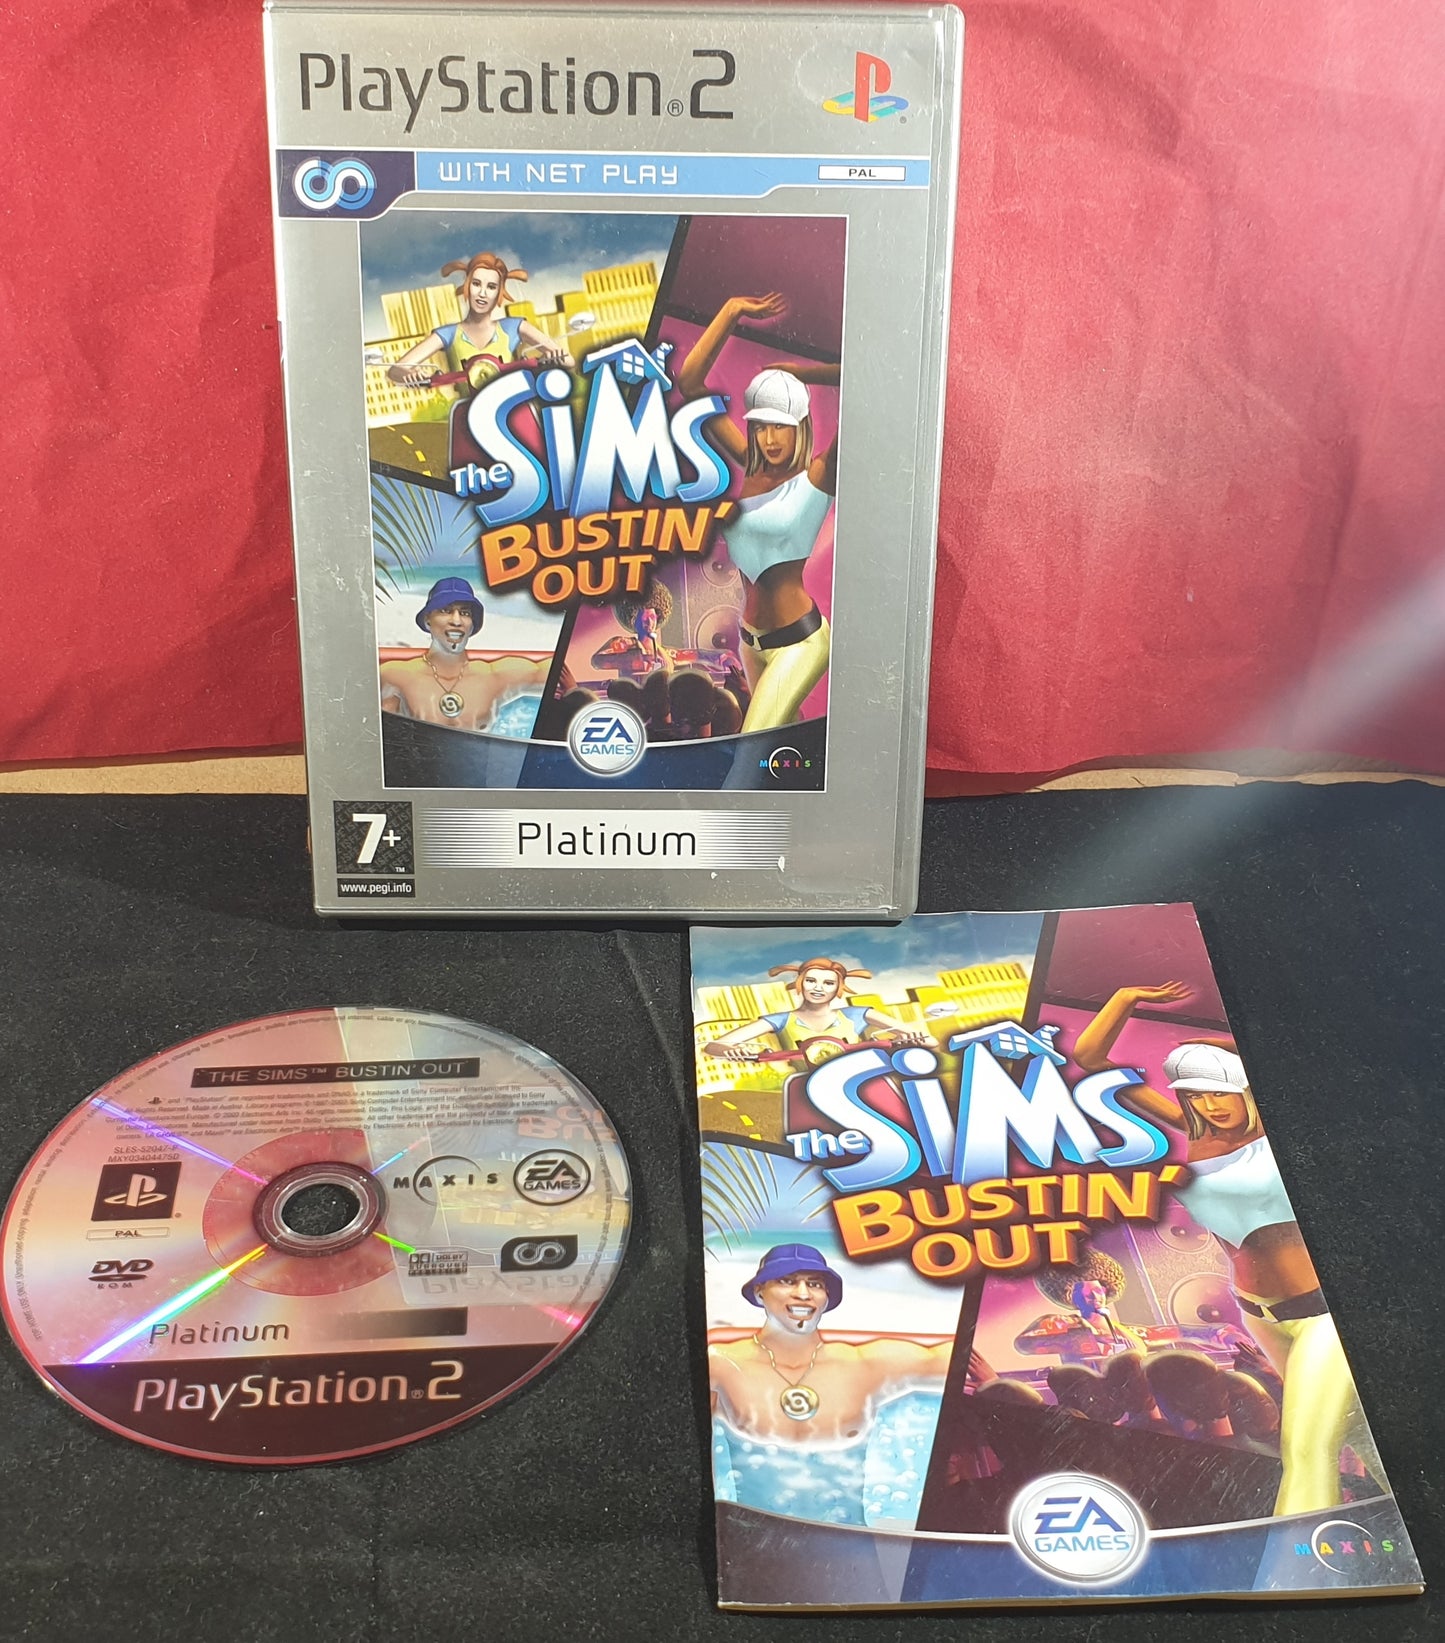 The Sims Bustin' Out Platinum Sony Playstation 2 (PS2) Game